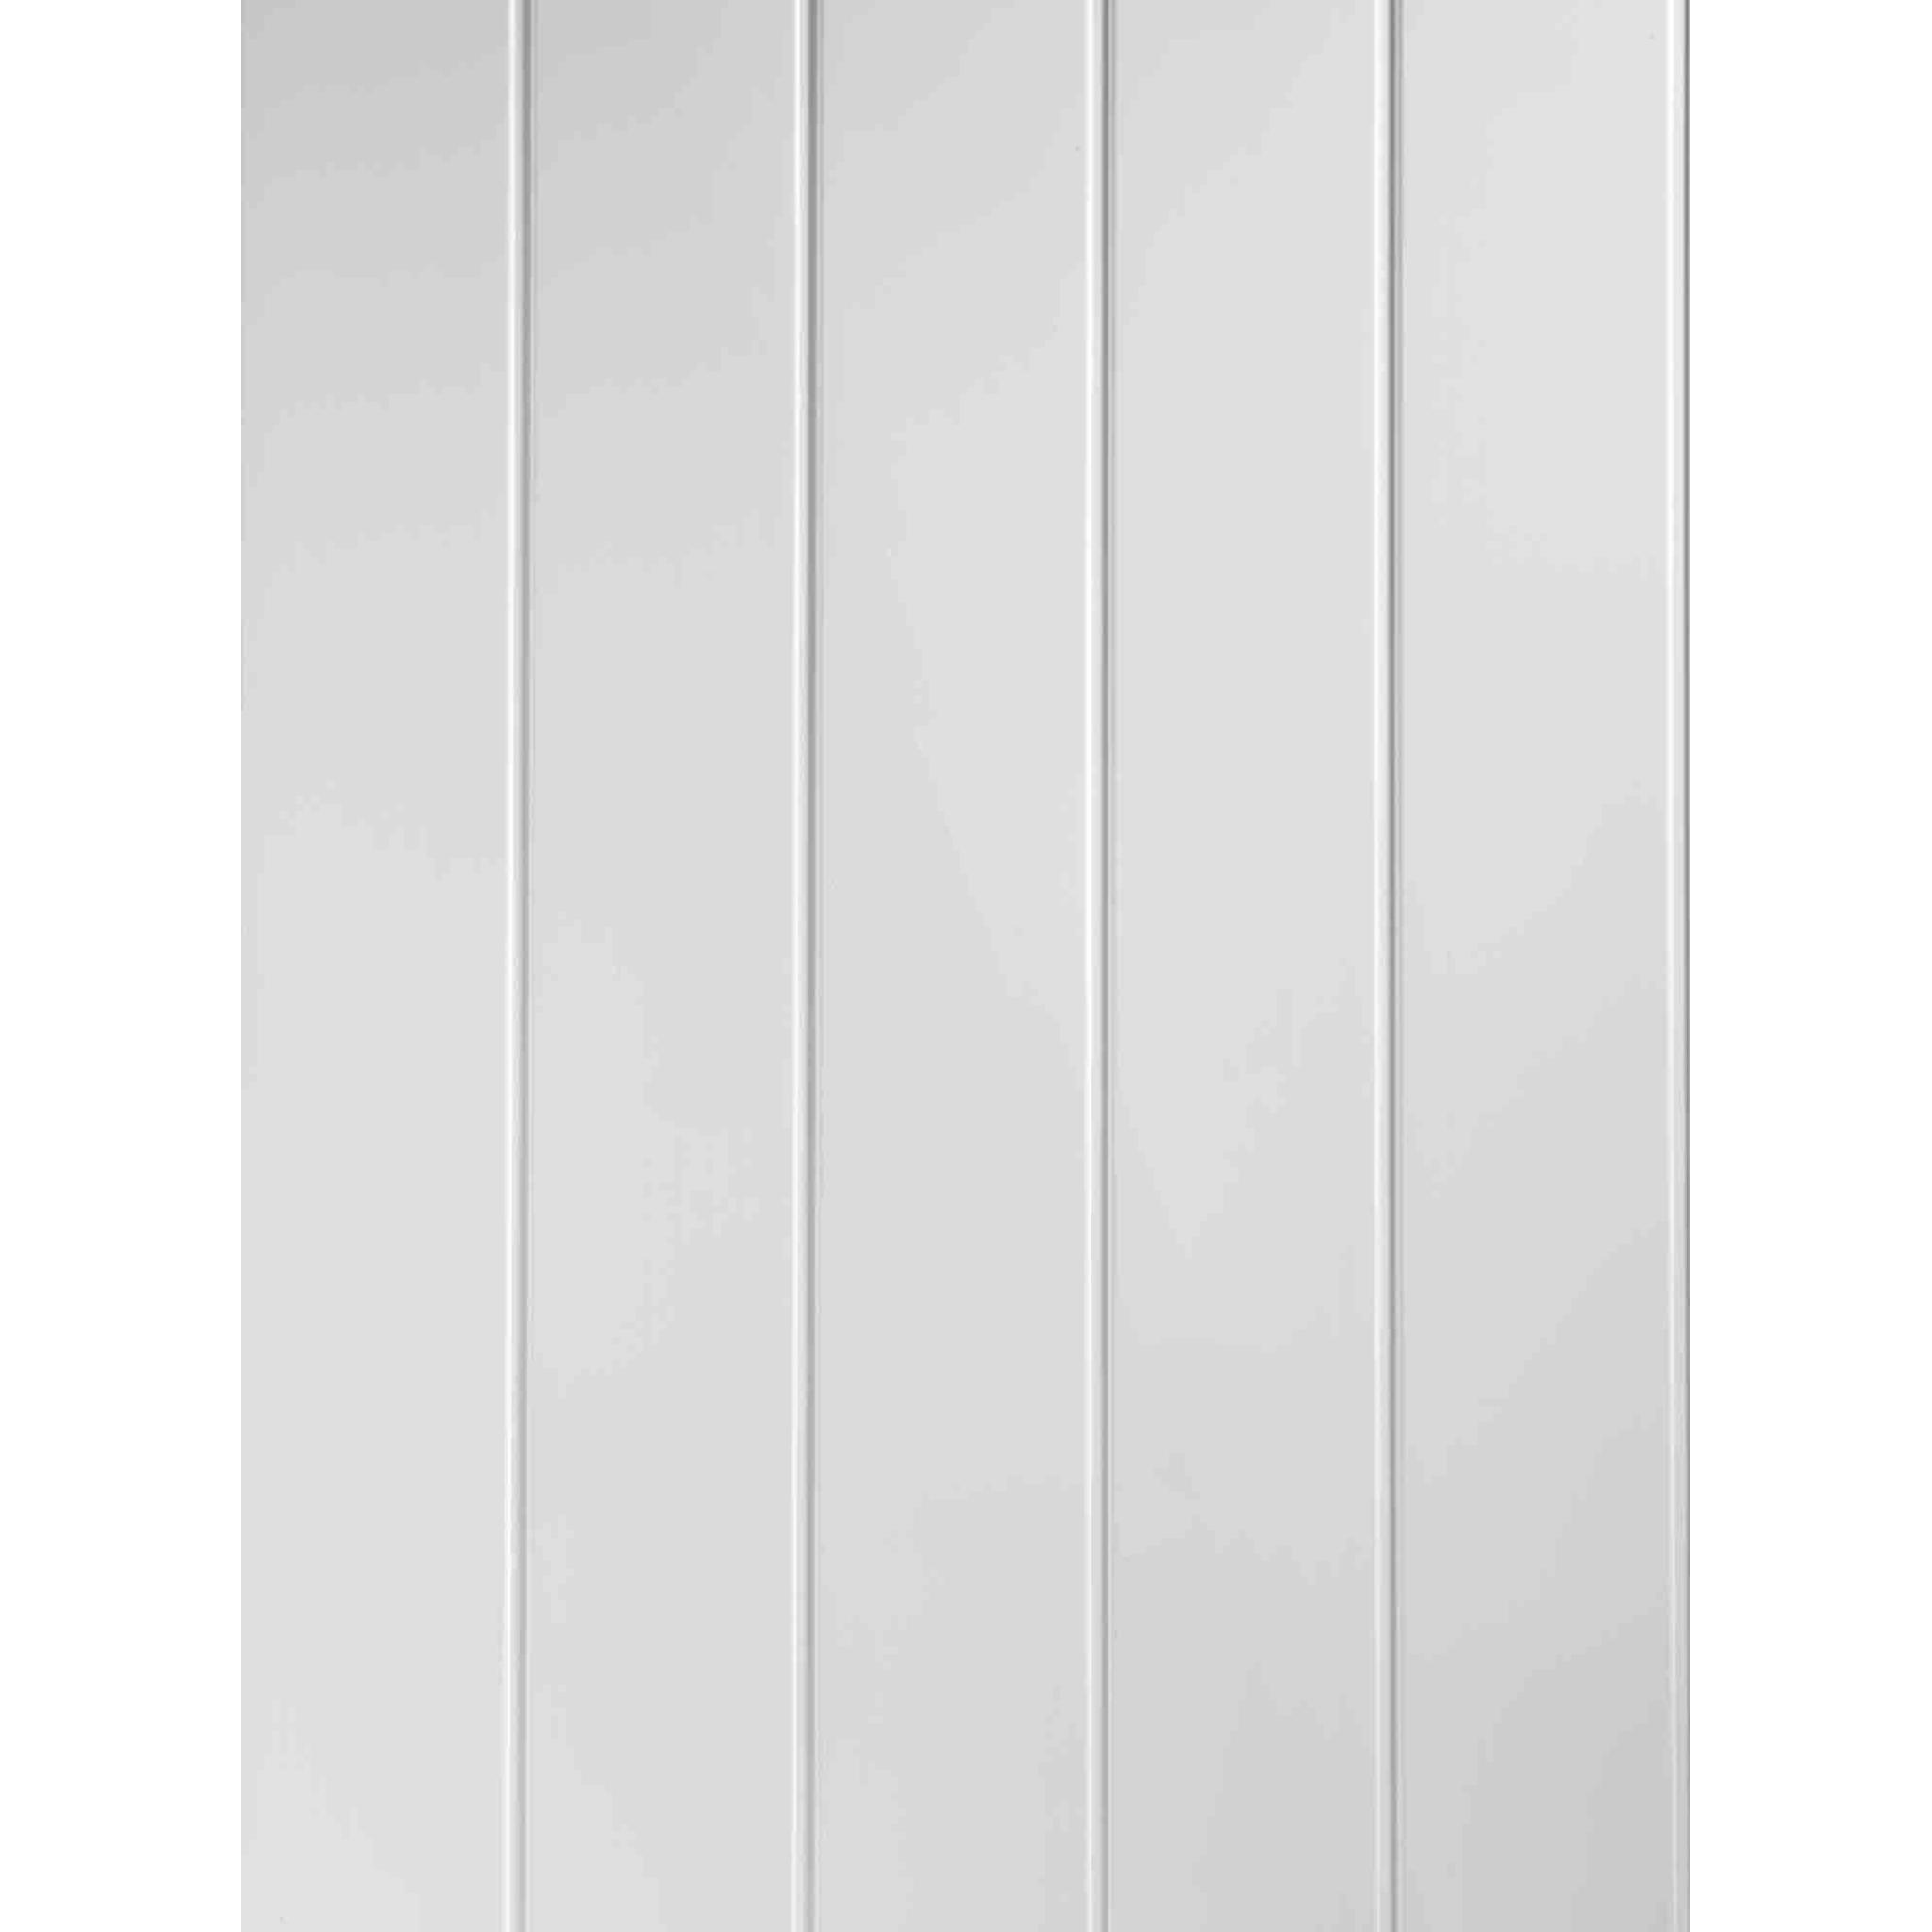 White Grooved Gloss - 250mm PVC Ceiling Cladding Panels (4)